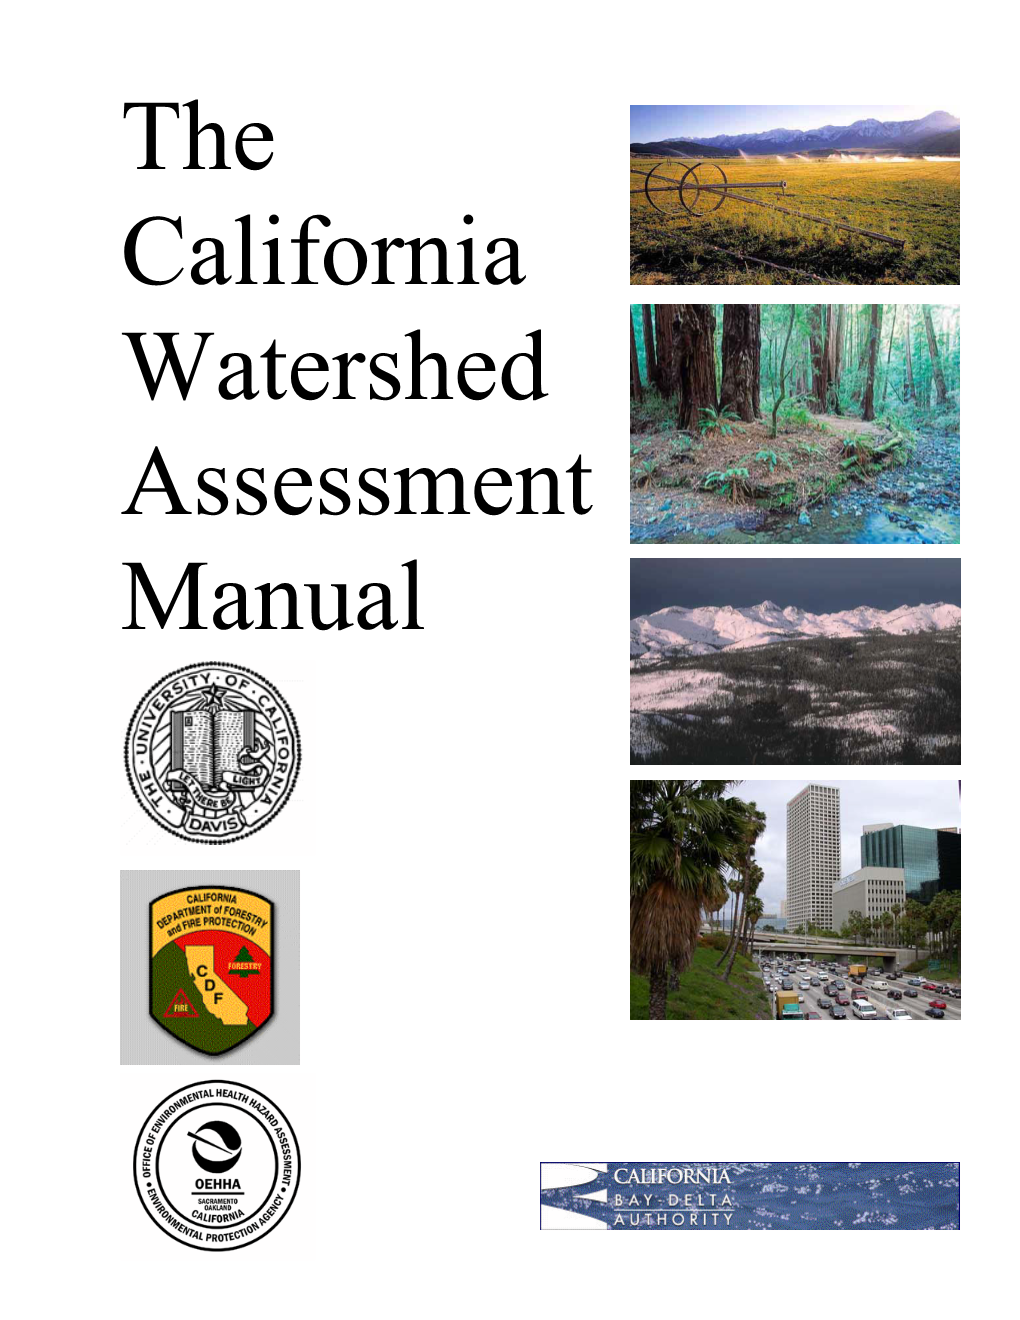 The California Watershed Assessment Manual